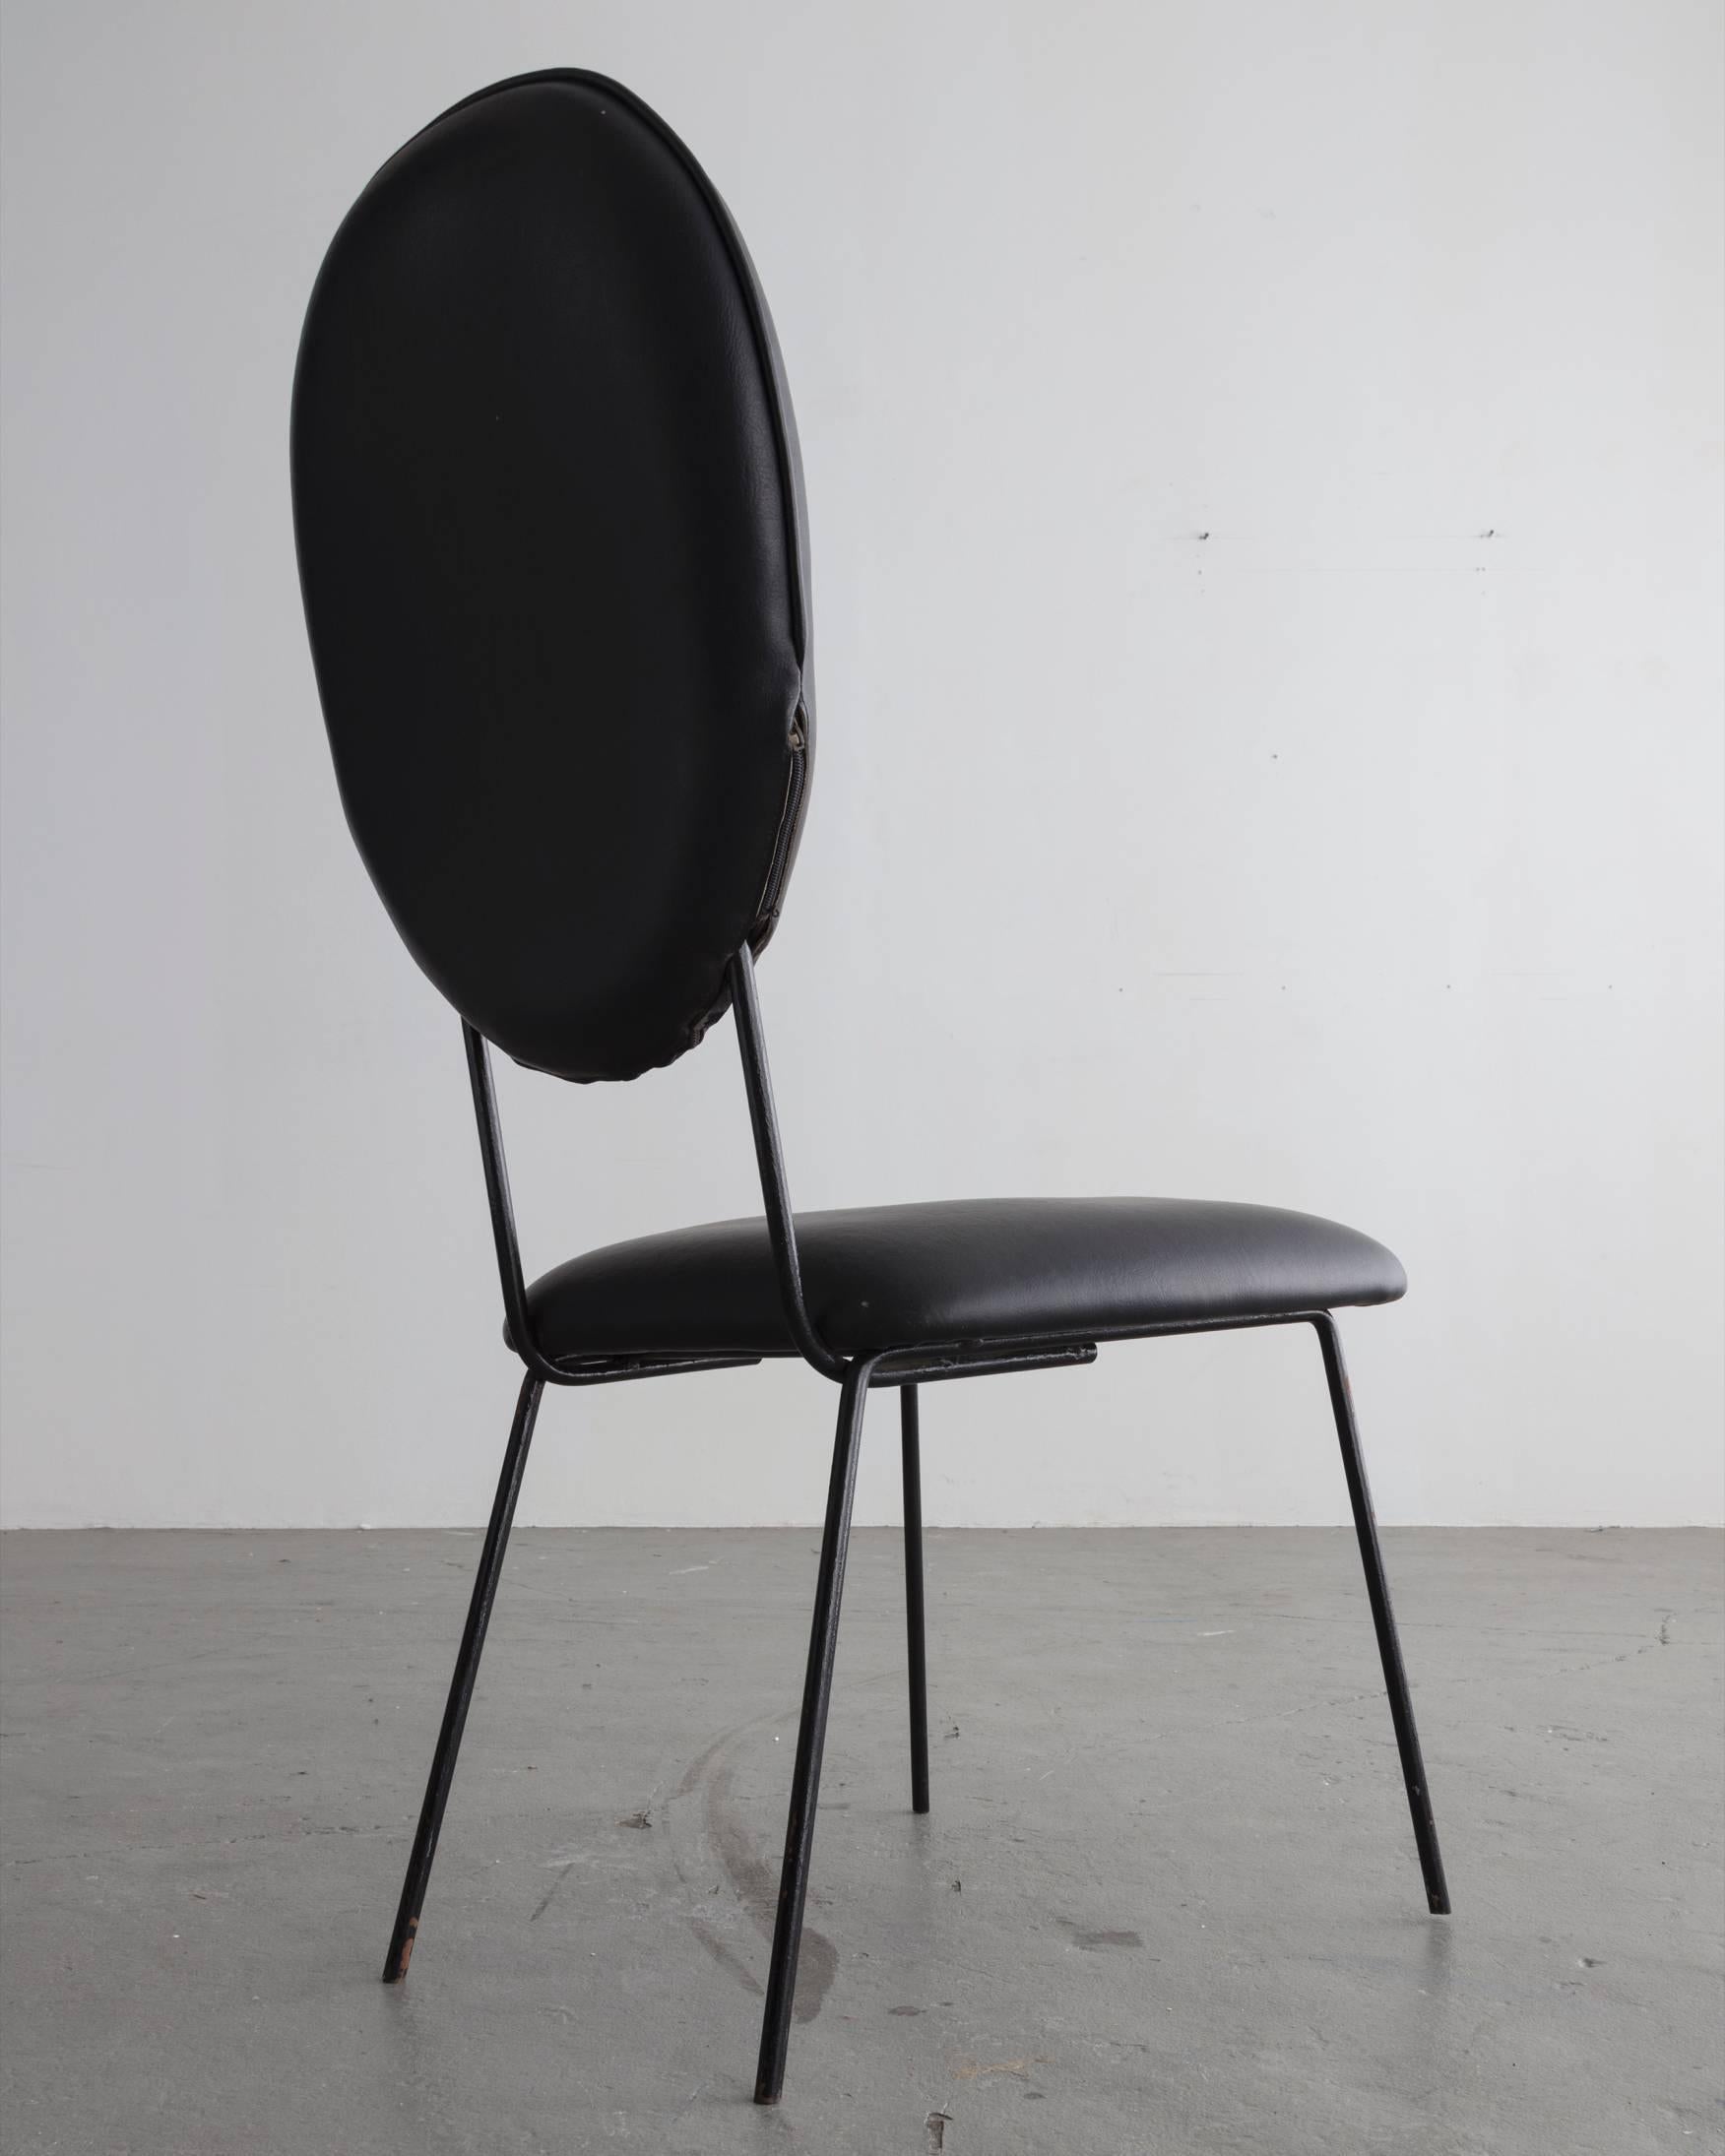 Set of six chairs with black upholstered seat and back and black wrought iron legs. Designed by Joaquim Tenreiro, Brazil, circa 1958.